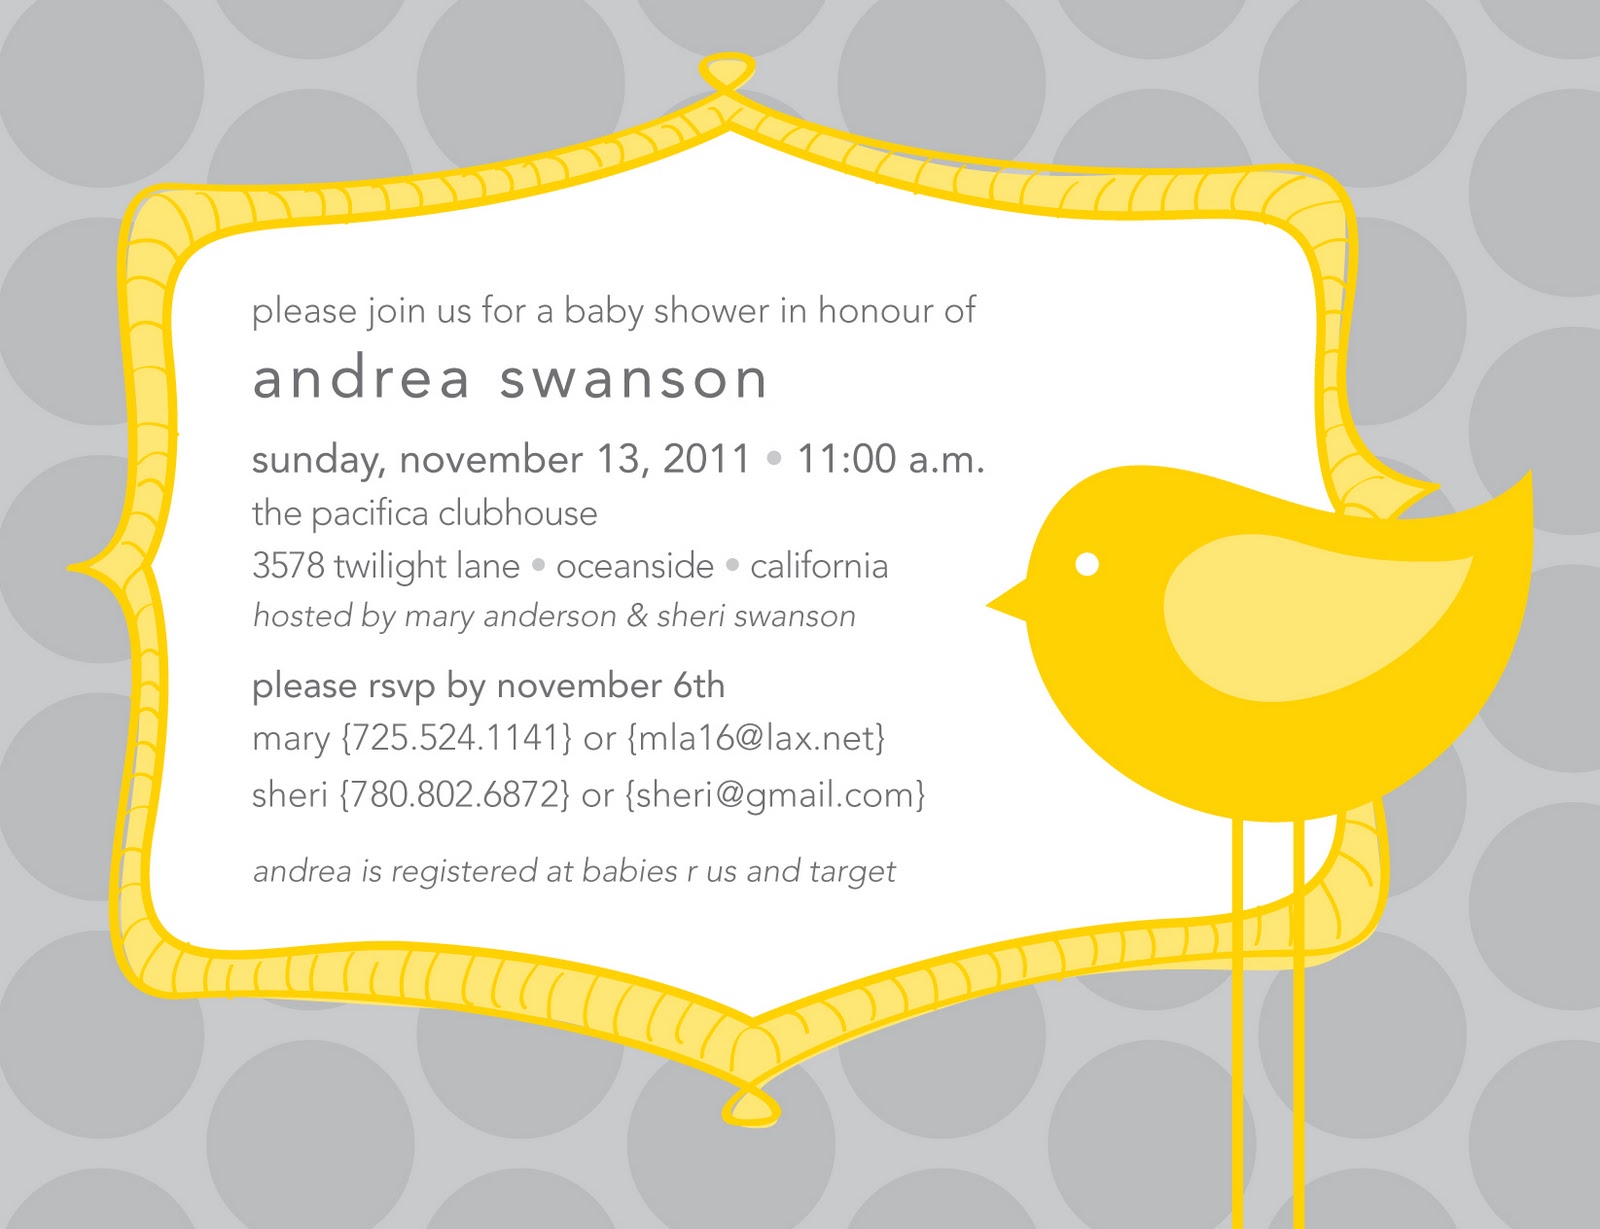 enjoy some of the recent baby shower invitations i created